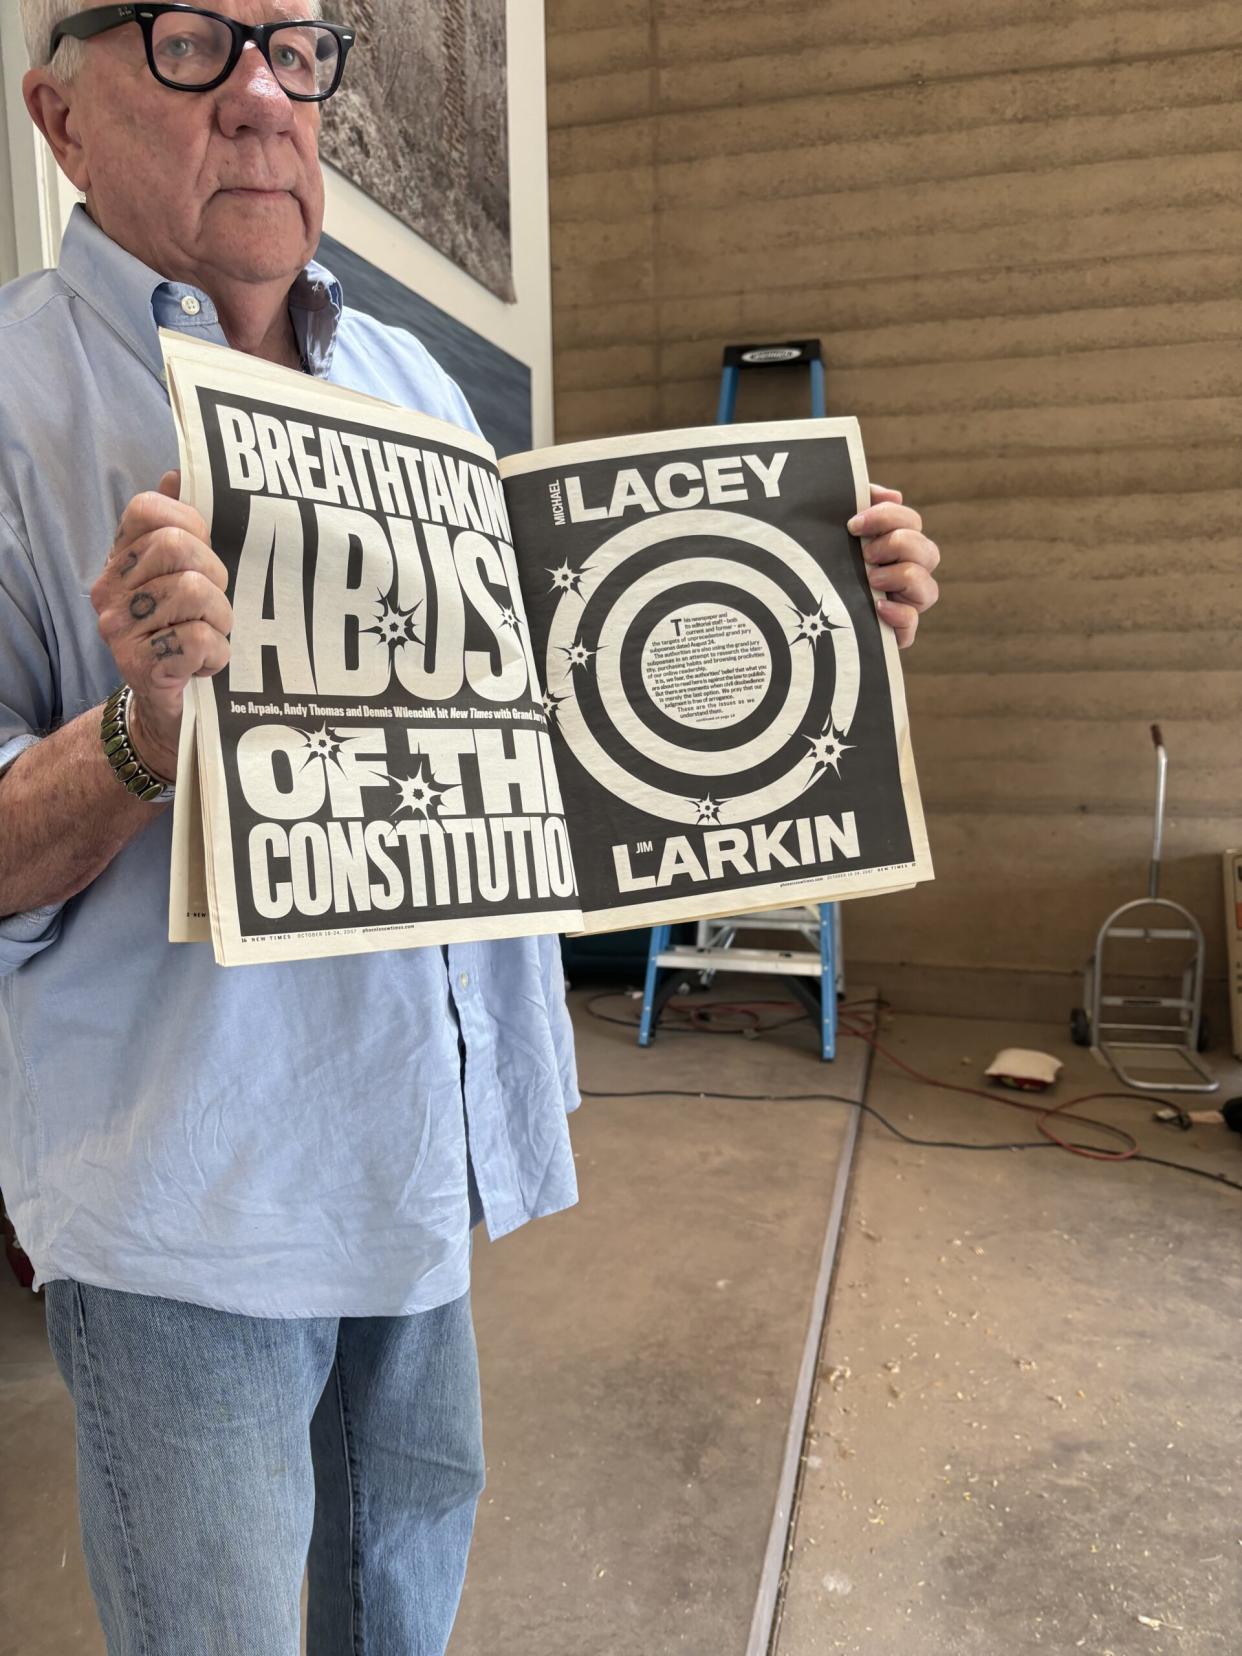 Lacey holds up a copy of a Phoenix New Times article about he and Larkin's prosecution by former Maricopa County Sheriff Joe Arpaio.